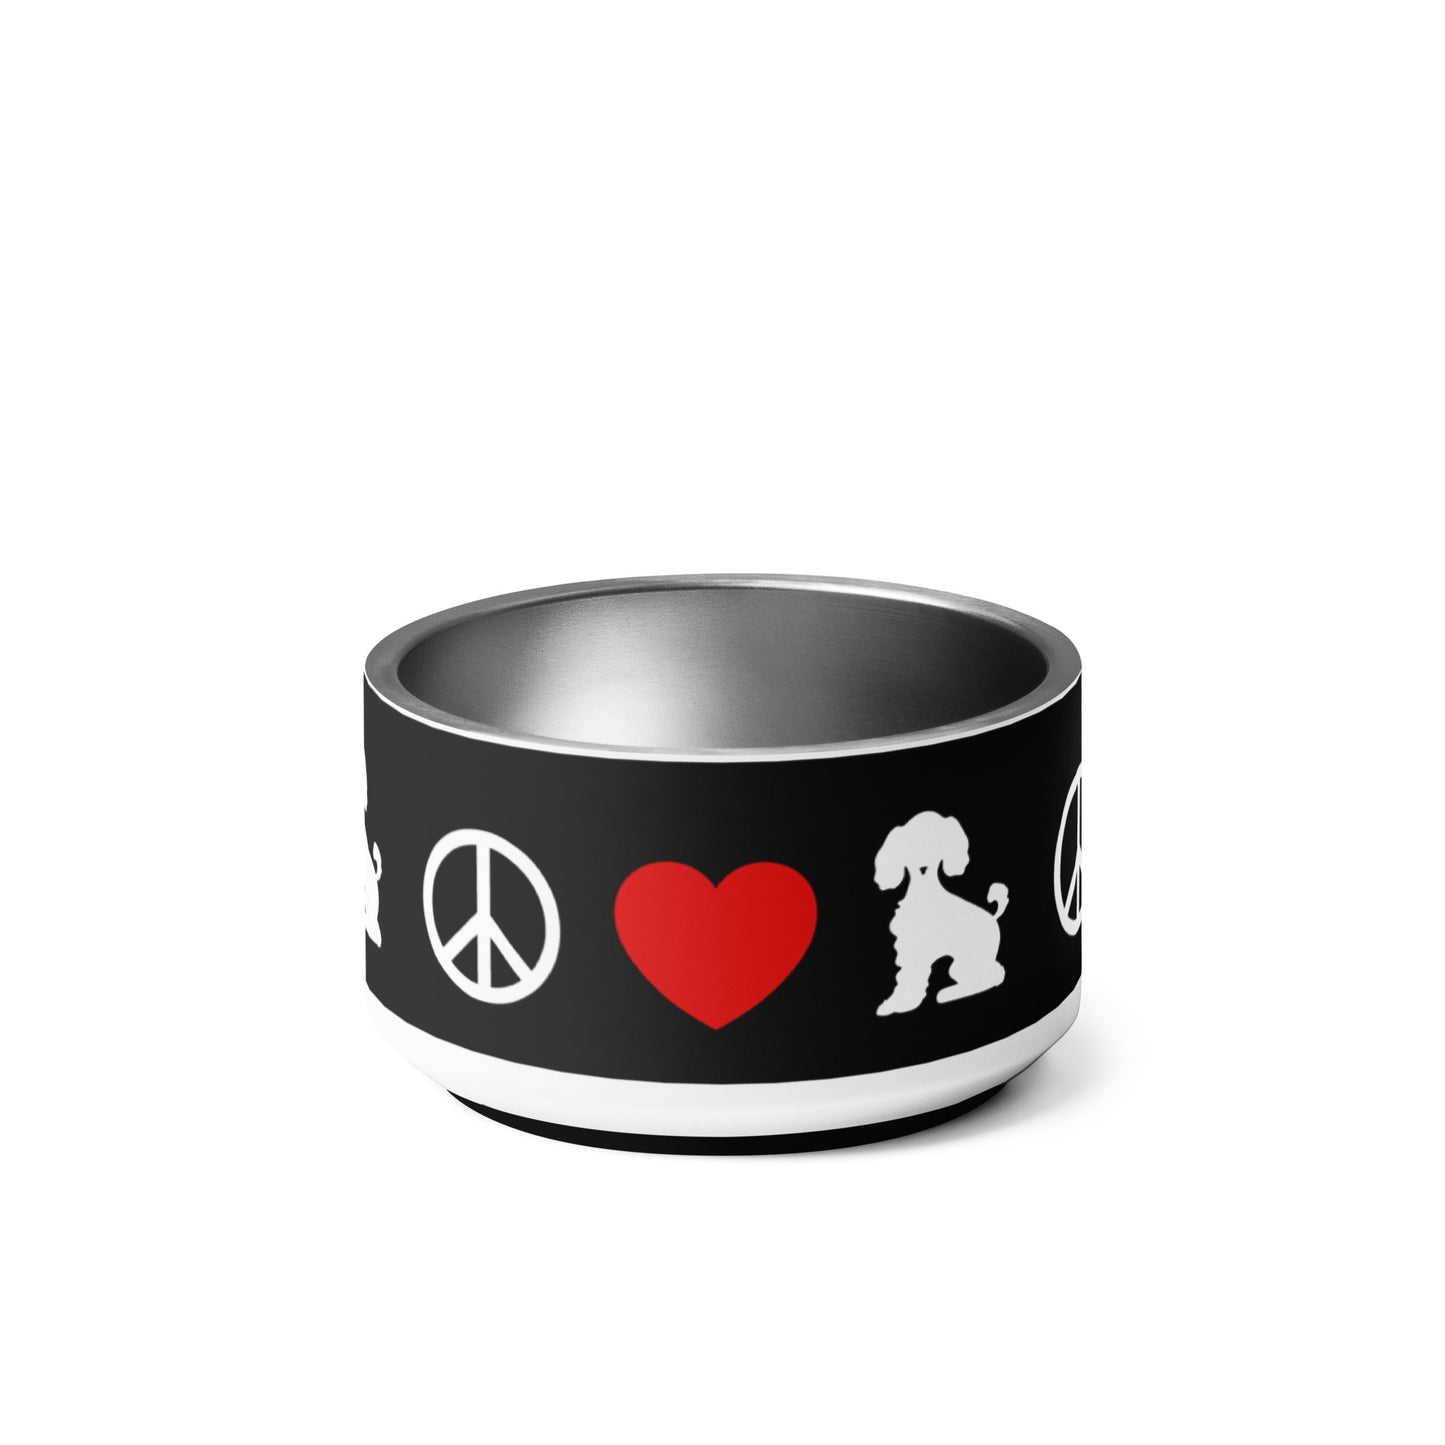 "Peace, Love, Poos" small pet bowl